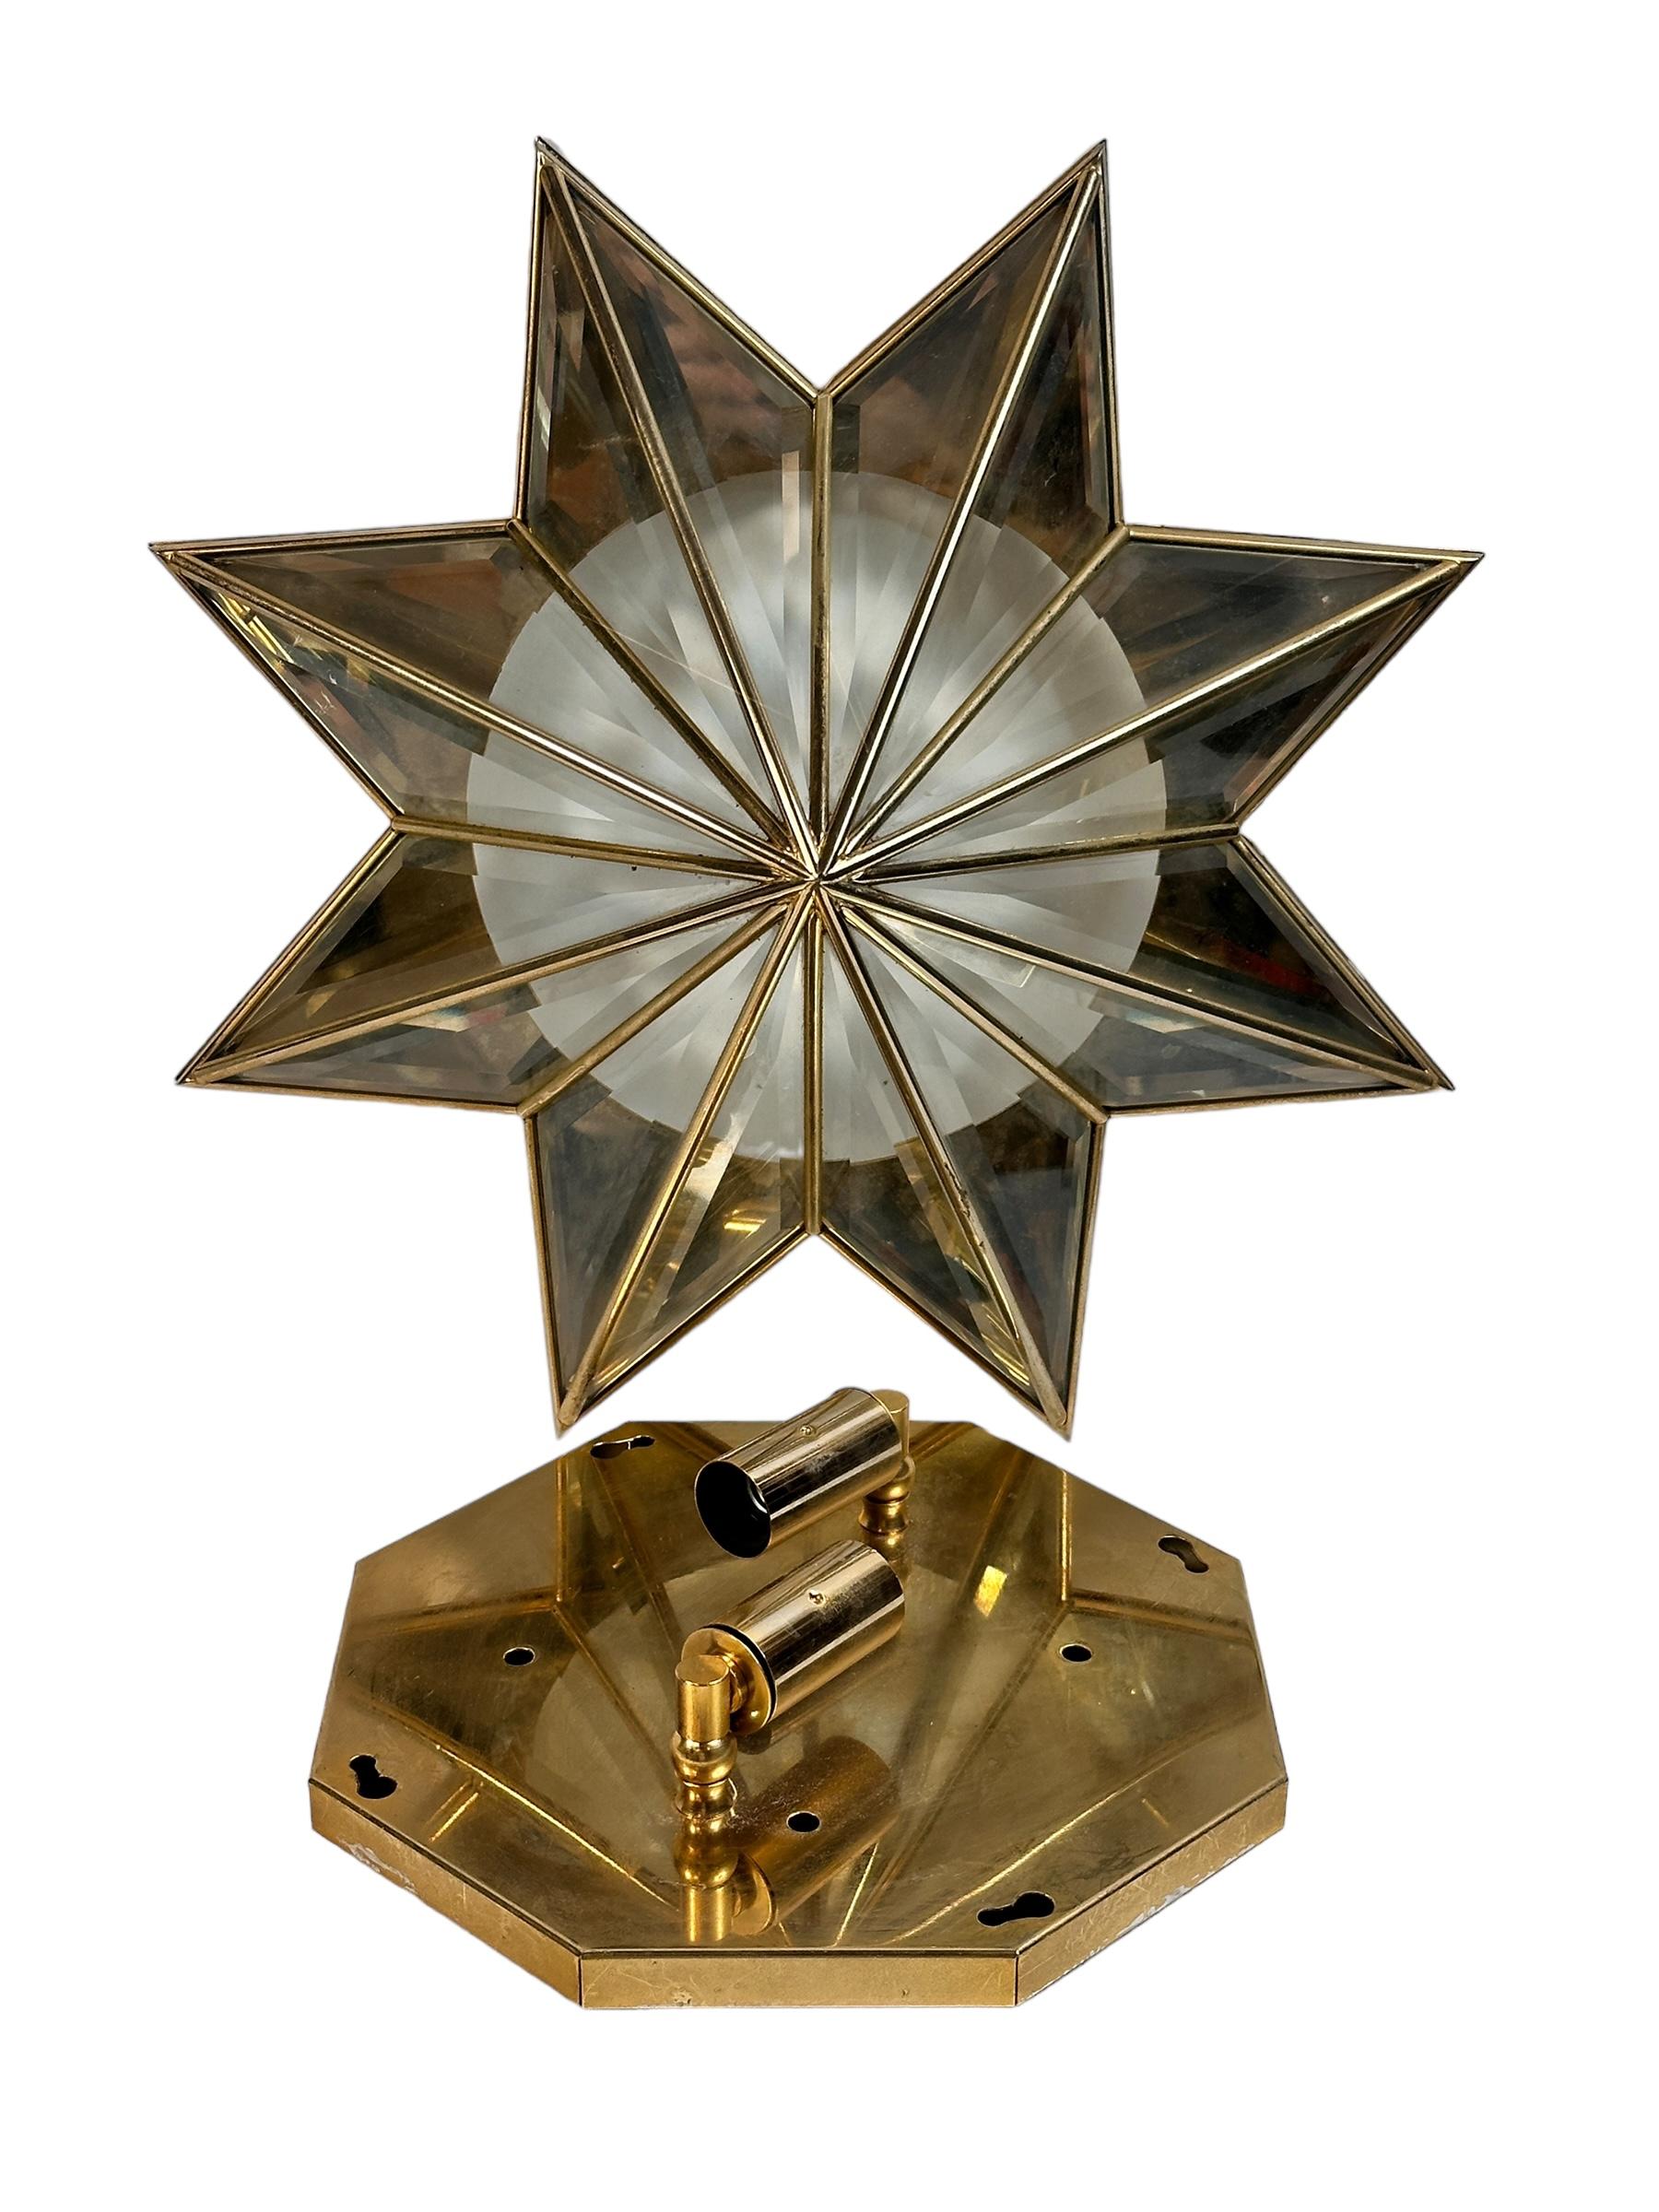 A beautiful flush mount or wall light, made in Germany in the 1960s. Made by Müller Leuchten in Munich. The fixture requires two European E14 candelabra bulbs, each bulb up to 40 watts. It can also hang as a wall fixture or sconce. The star